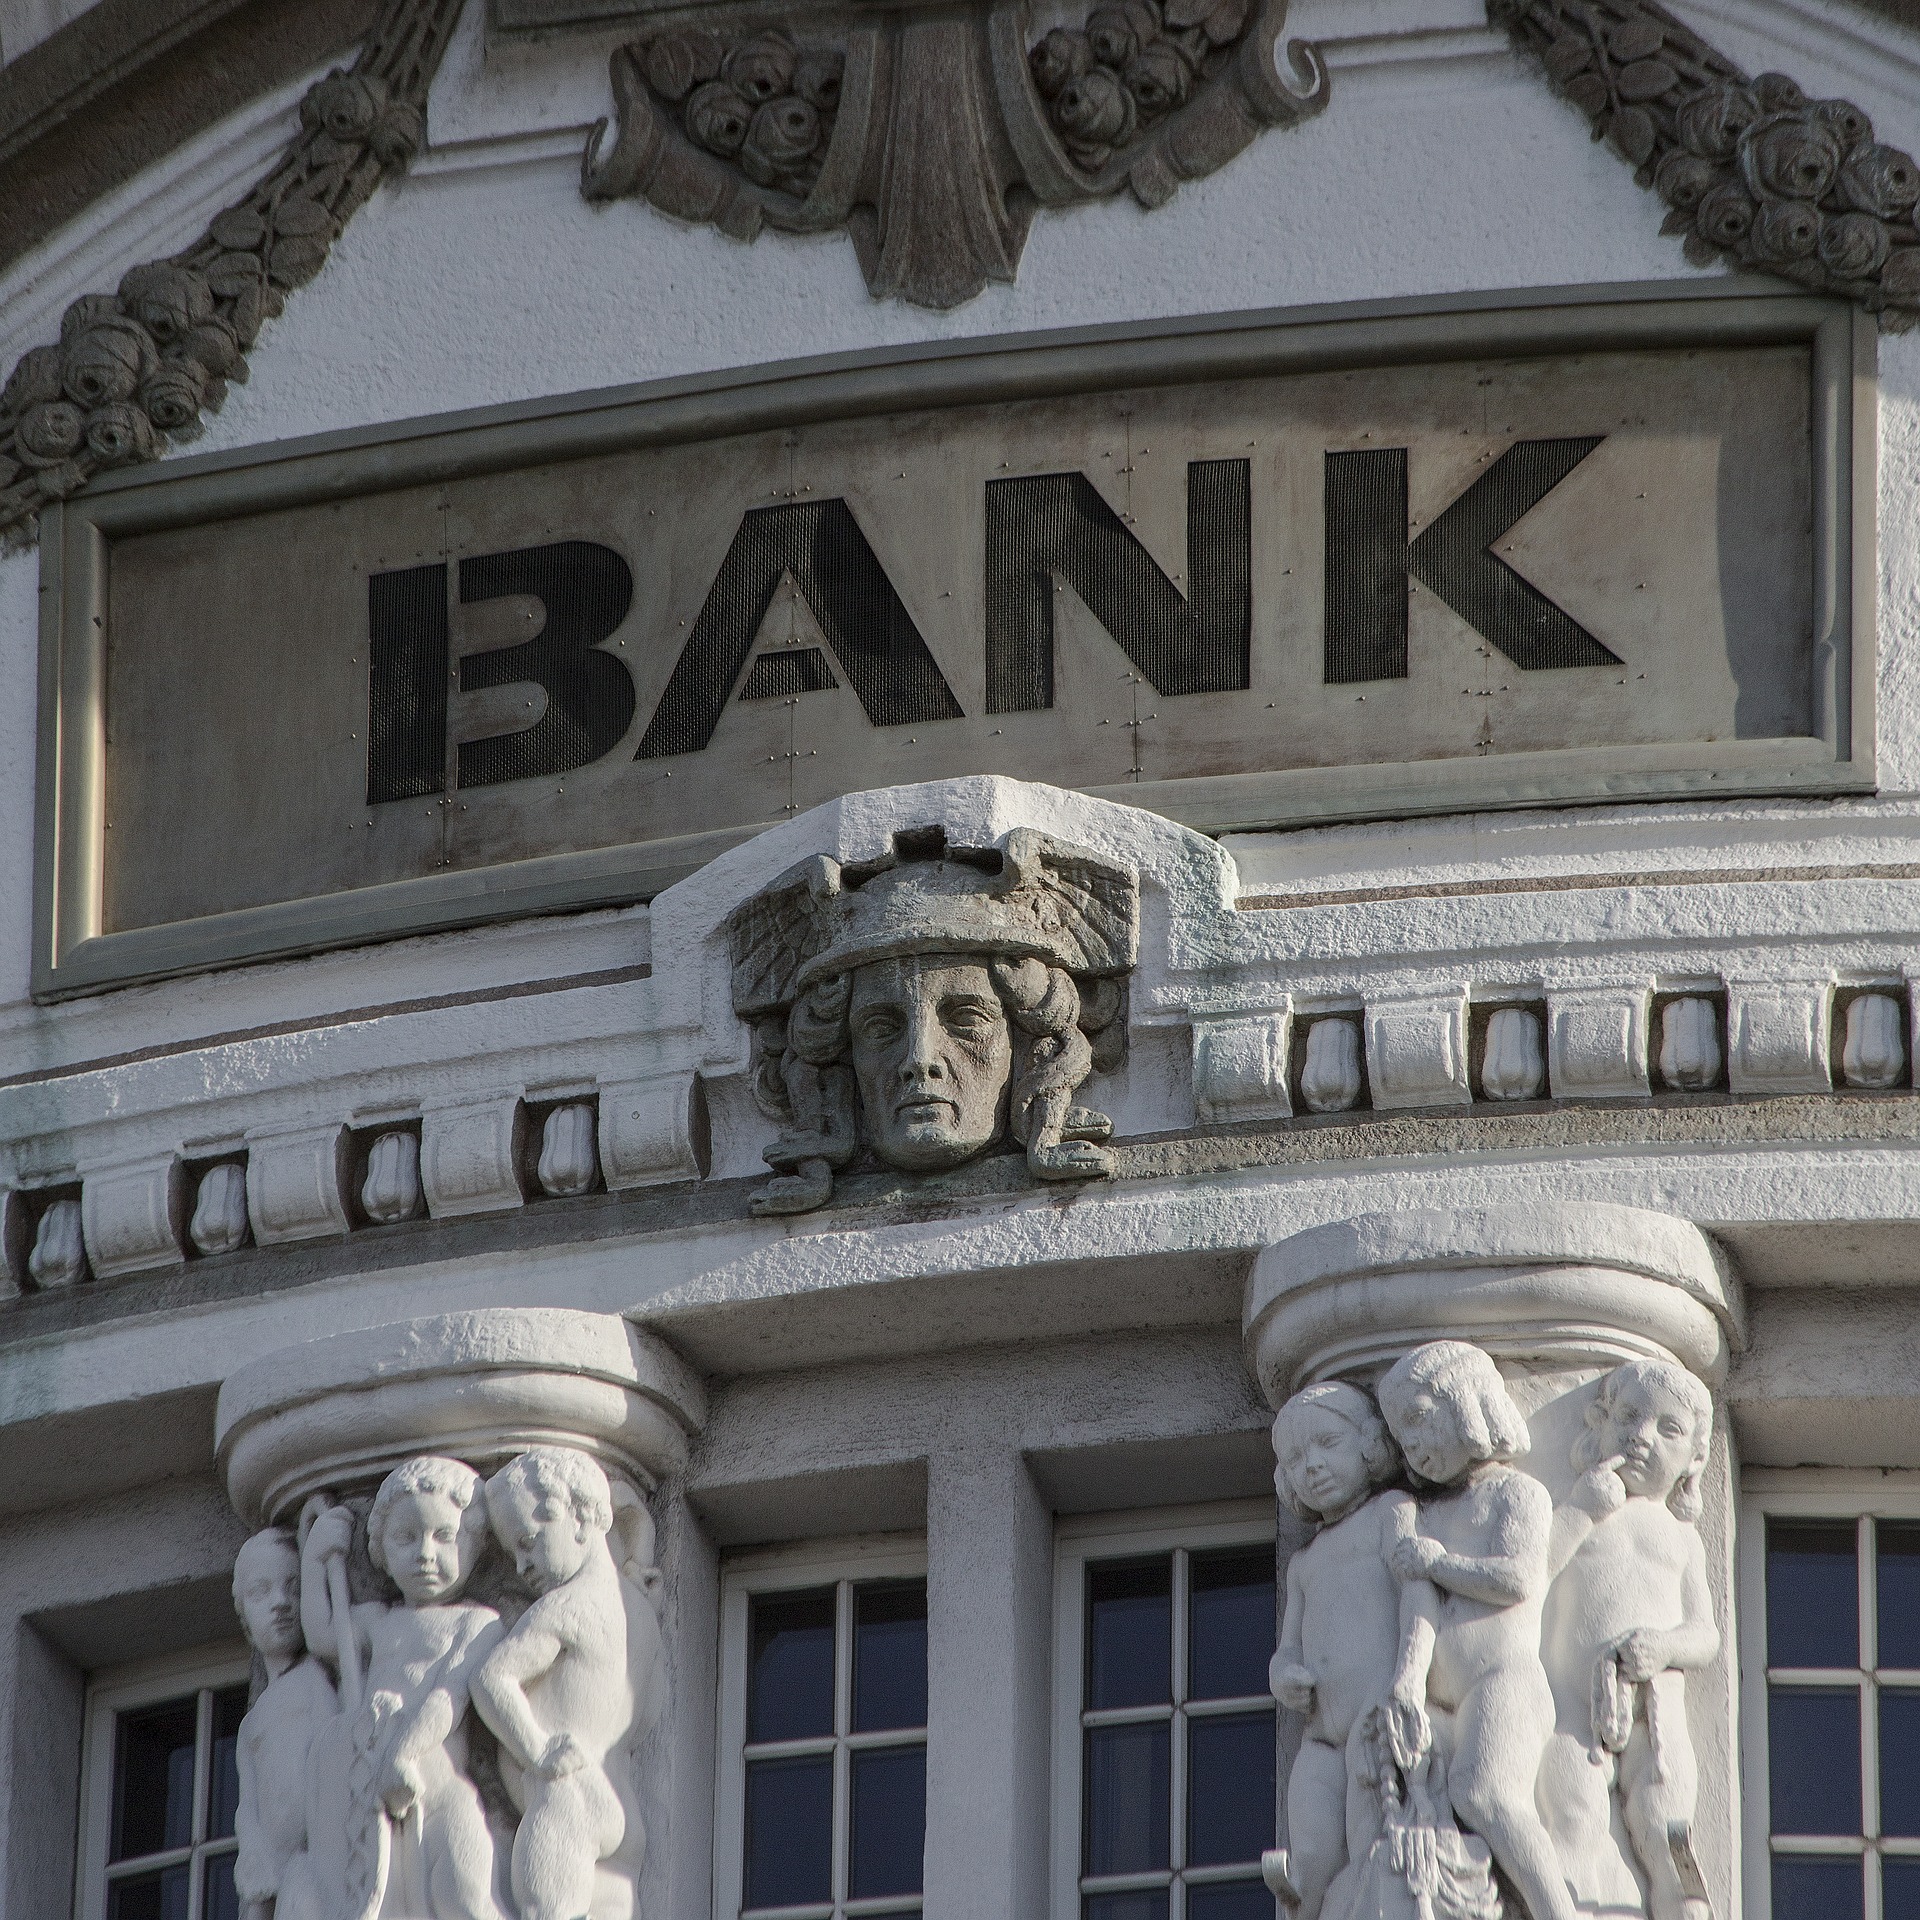 The front of a bank.